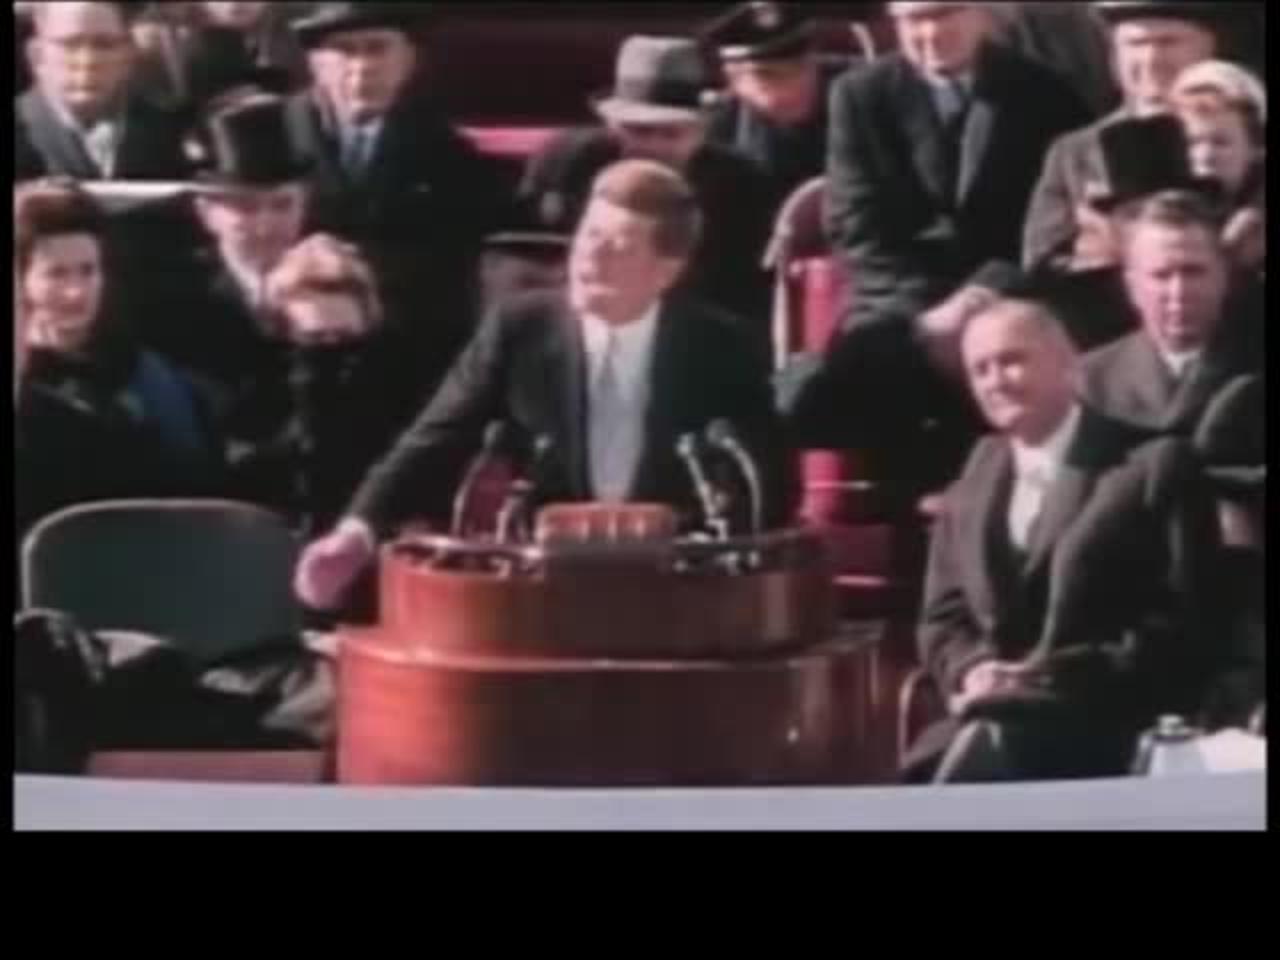 John Fitzgerald Kennedy - Inauguration Speech - Remembered and Honored this Day  on 11/22/22